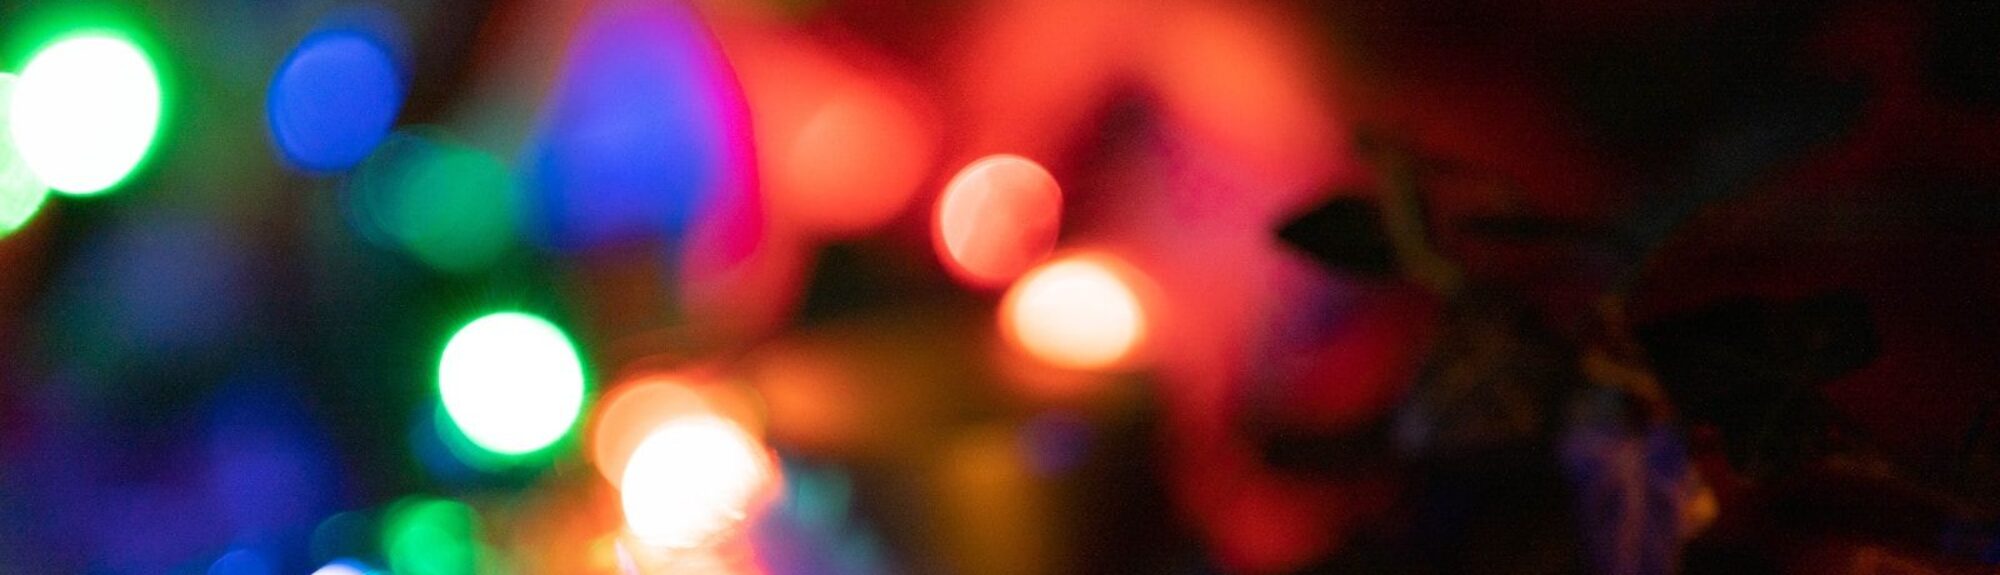 bokeh photography of red and yellow lights